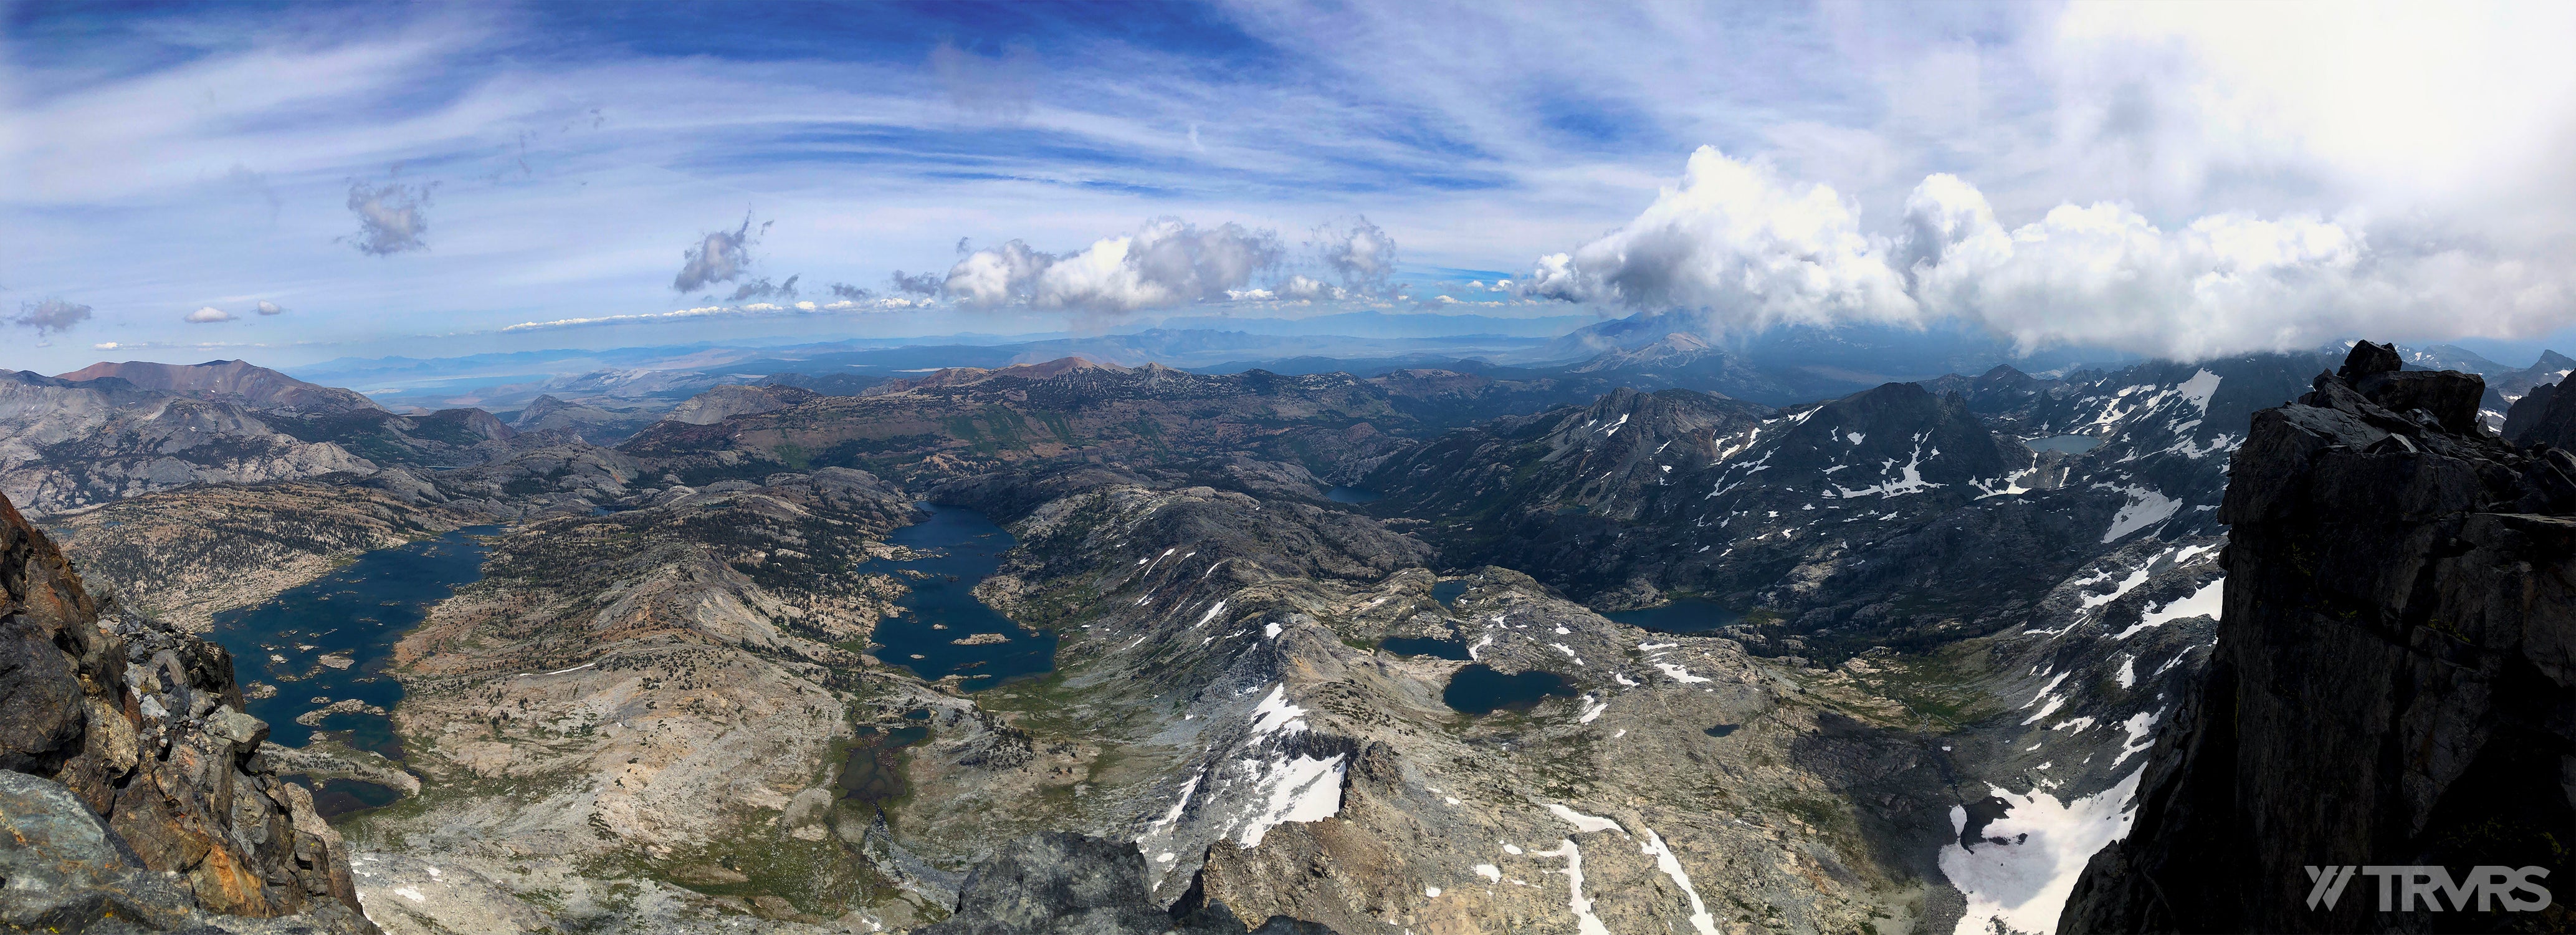 Looking Northeast from Banner Peak - Ritter-Banner Saddle, Lake Catherine, Glacier Pass, Thousand Island Lake, River Trail, Pacific Crest Trail, Middle Fork, Agnew Meadow, Ansel Adams Wilderness, Mammoth Lakes, Sierra Nevada | TRVRS Apparel